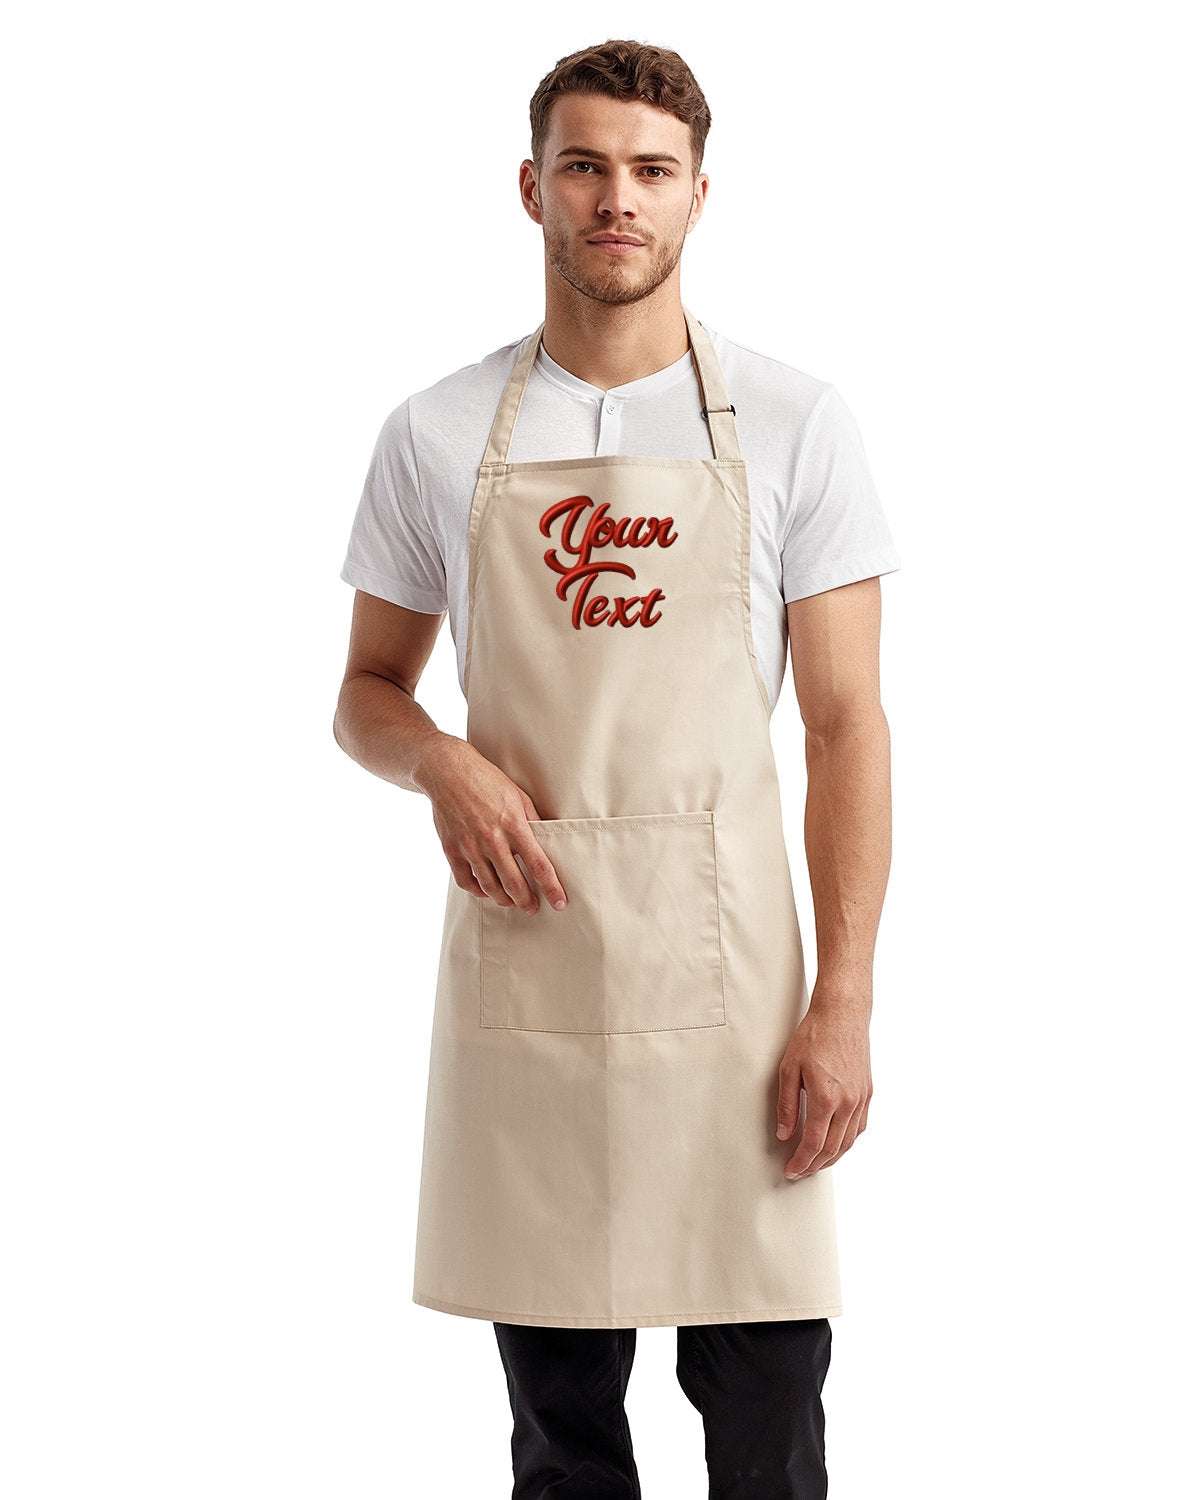 Restaurant Aprons with Your Company Name Embroidered - 3 Pack natural